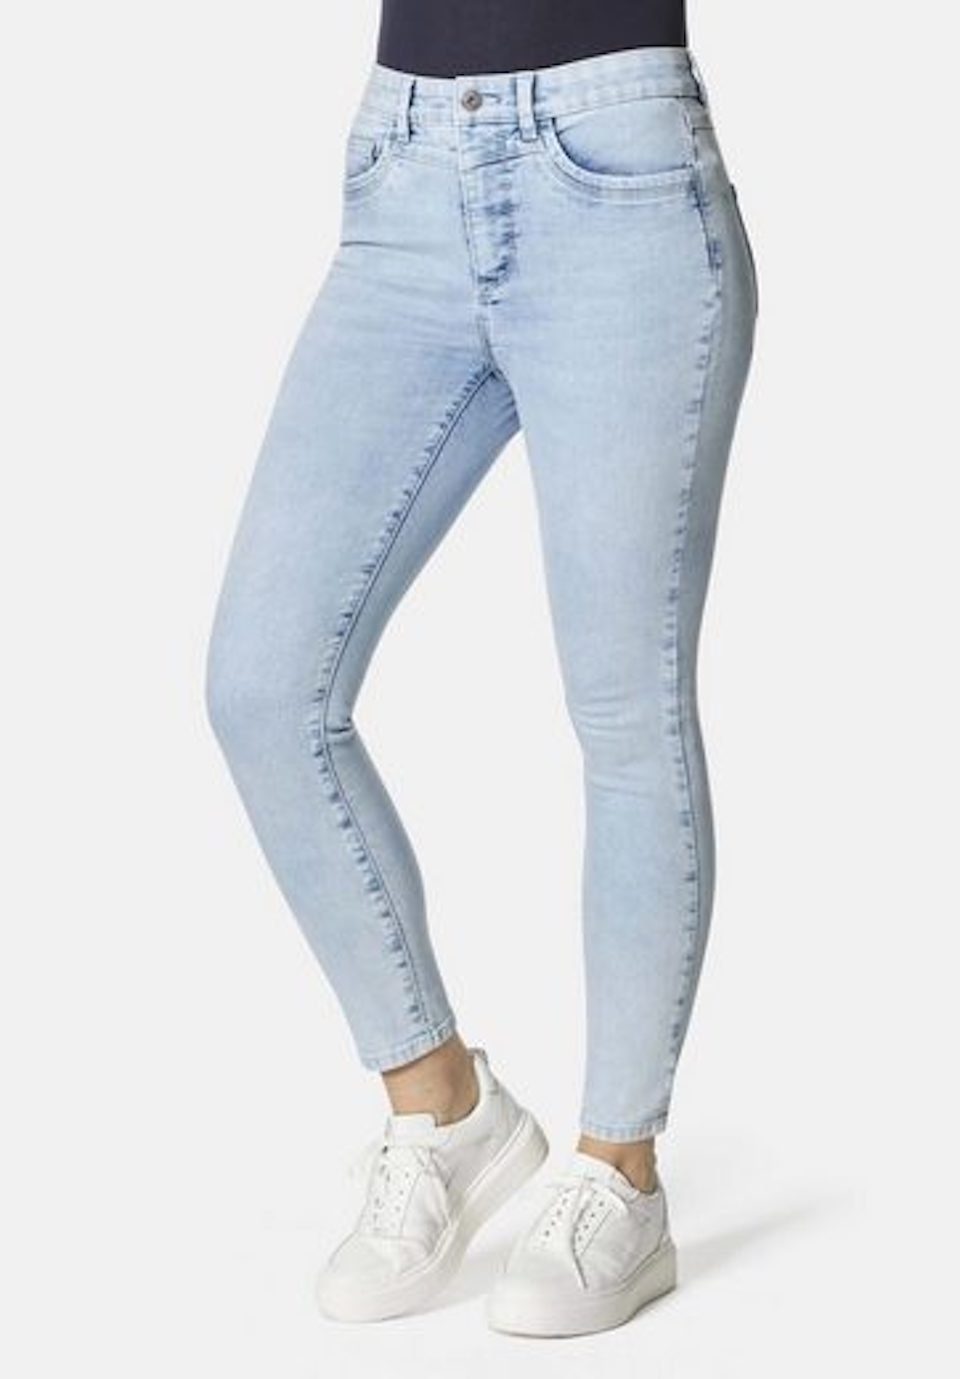 - JEANS SKINNY RIO Skinny-fit-Jeans WOMEN STRETCH STOOKER FIT - MOVE STRASS FEXXI Blue bleached